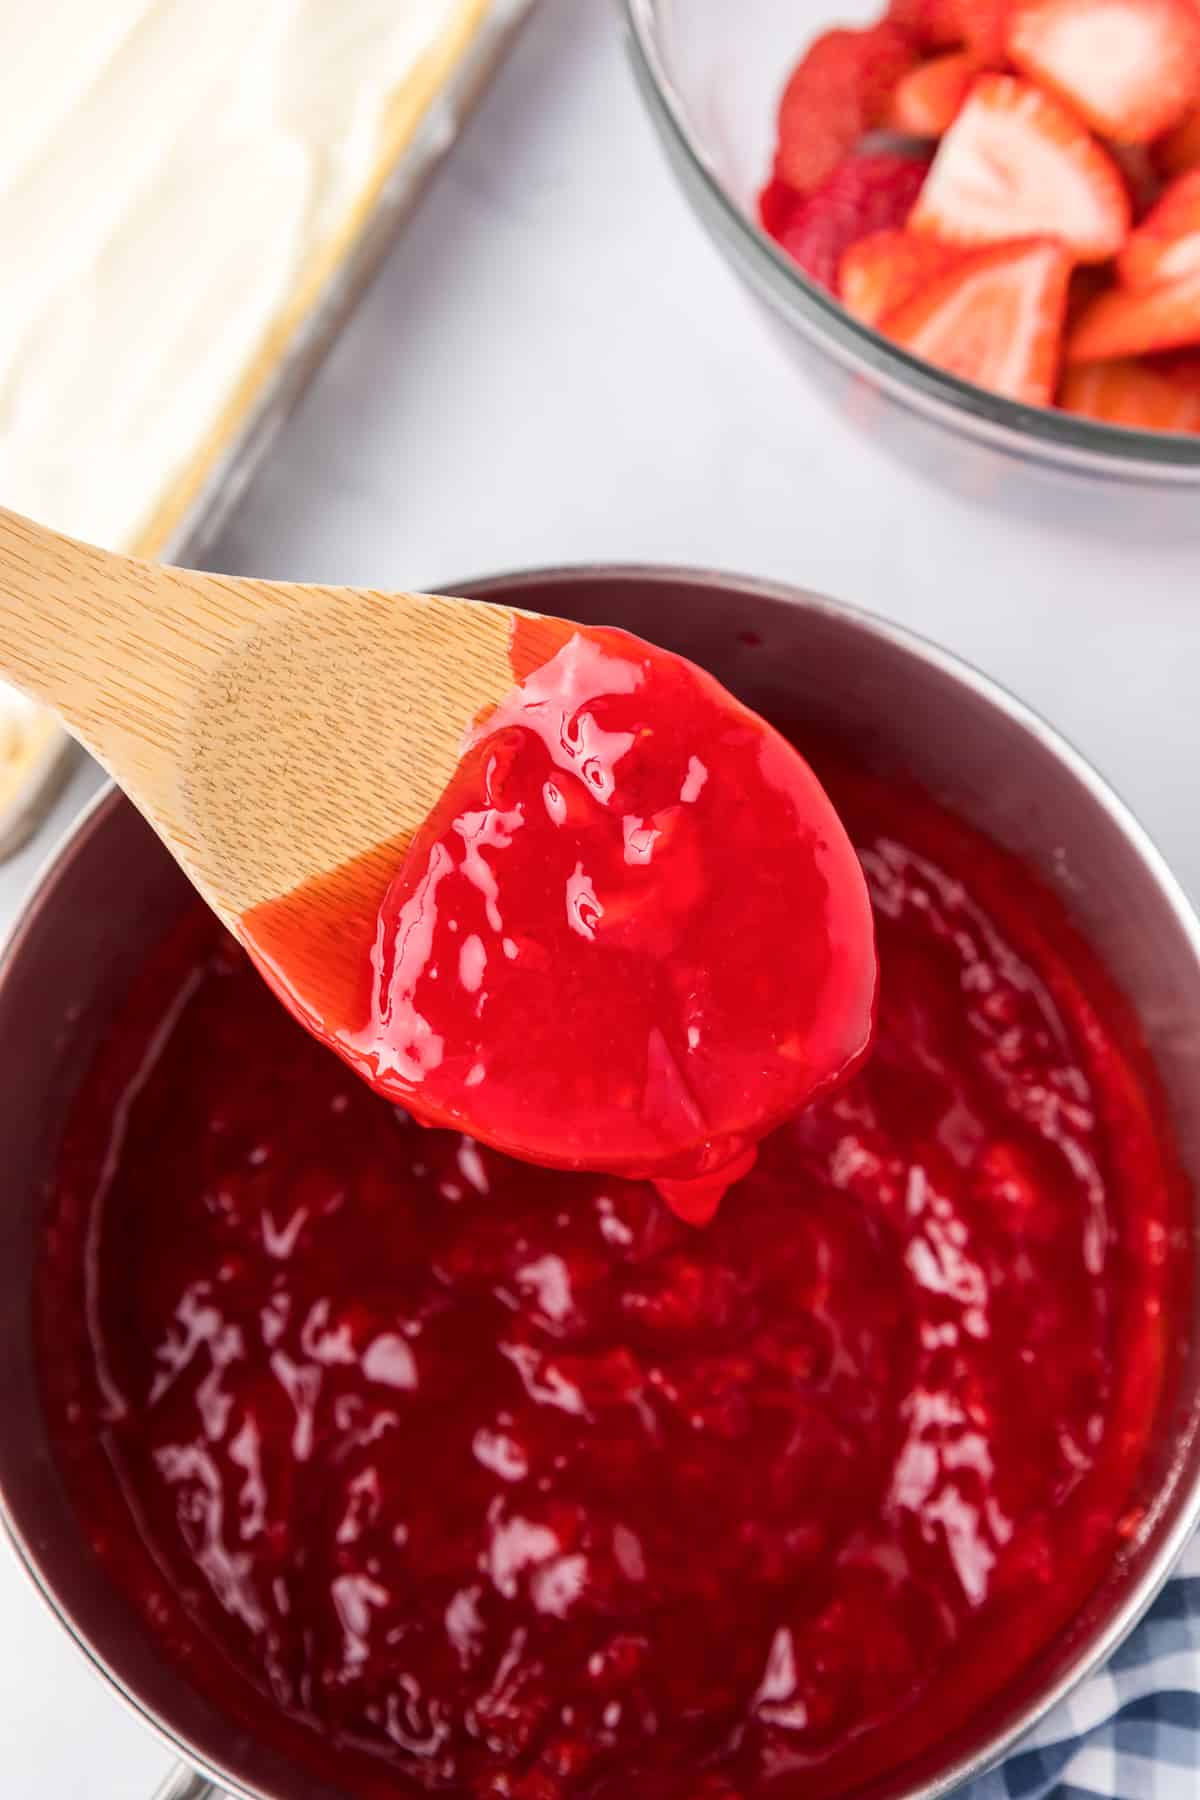 Thick strawberry sauce being lifted from the pan with a wooden spoon.